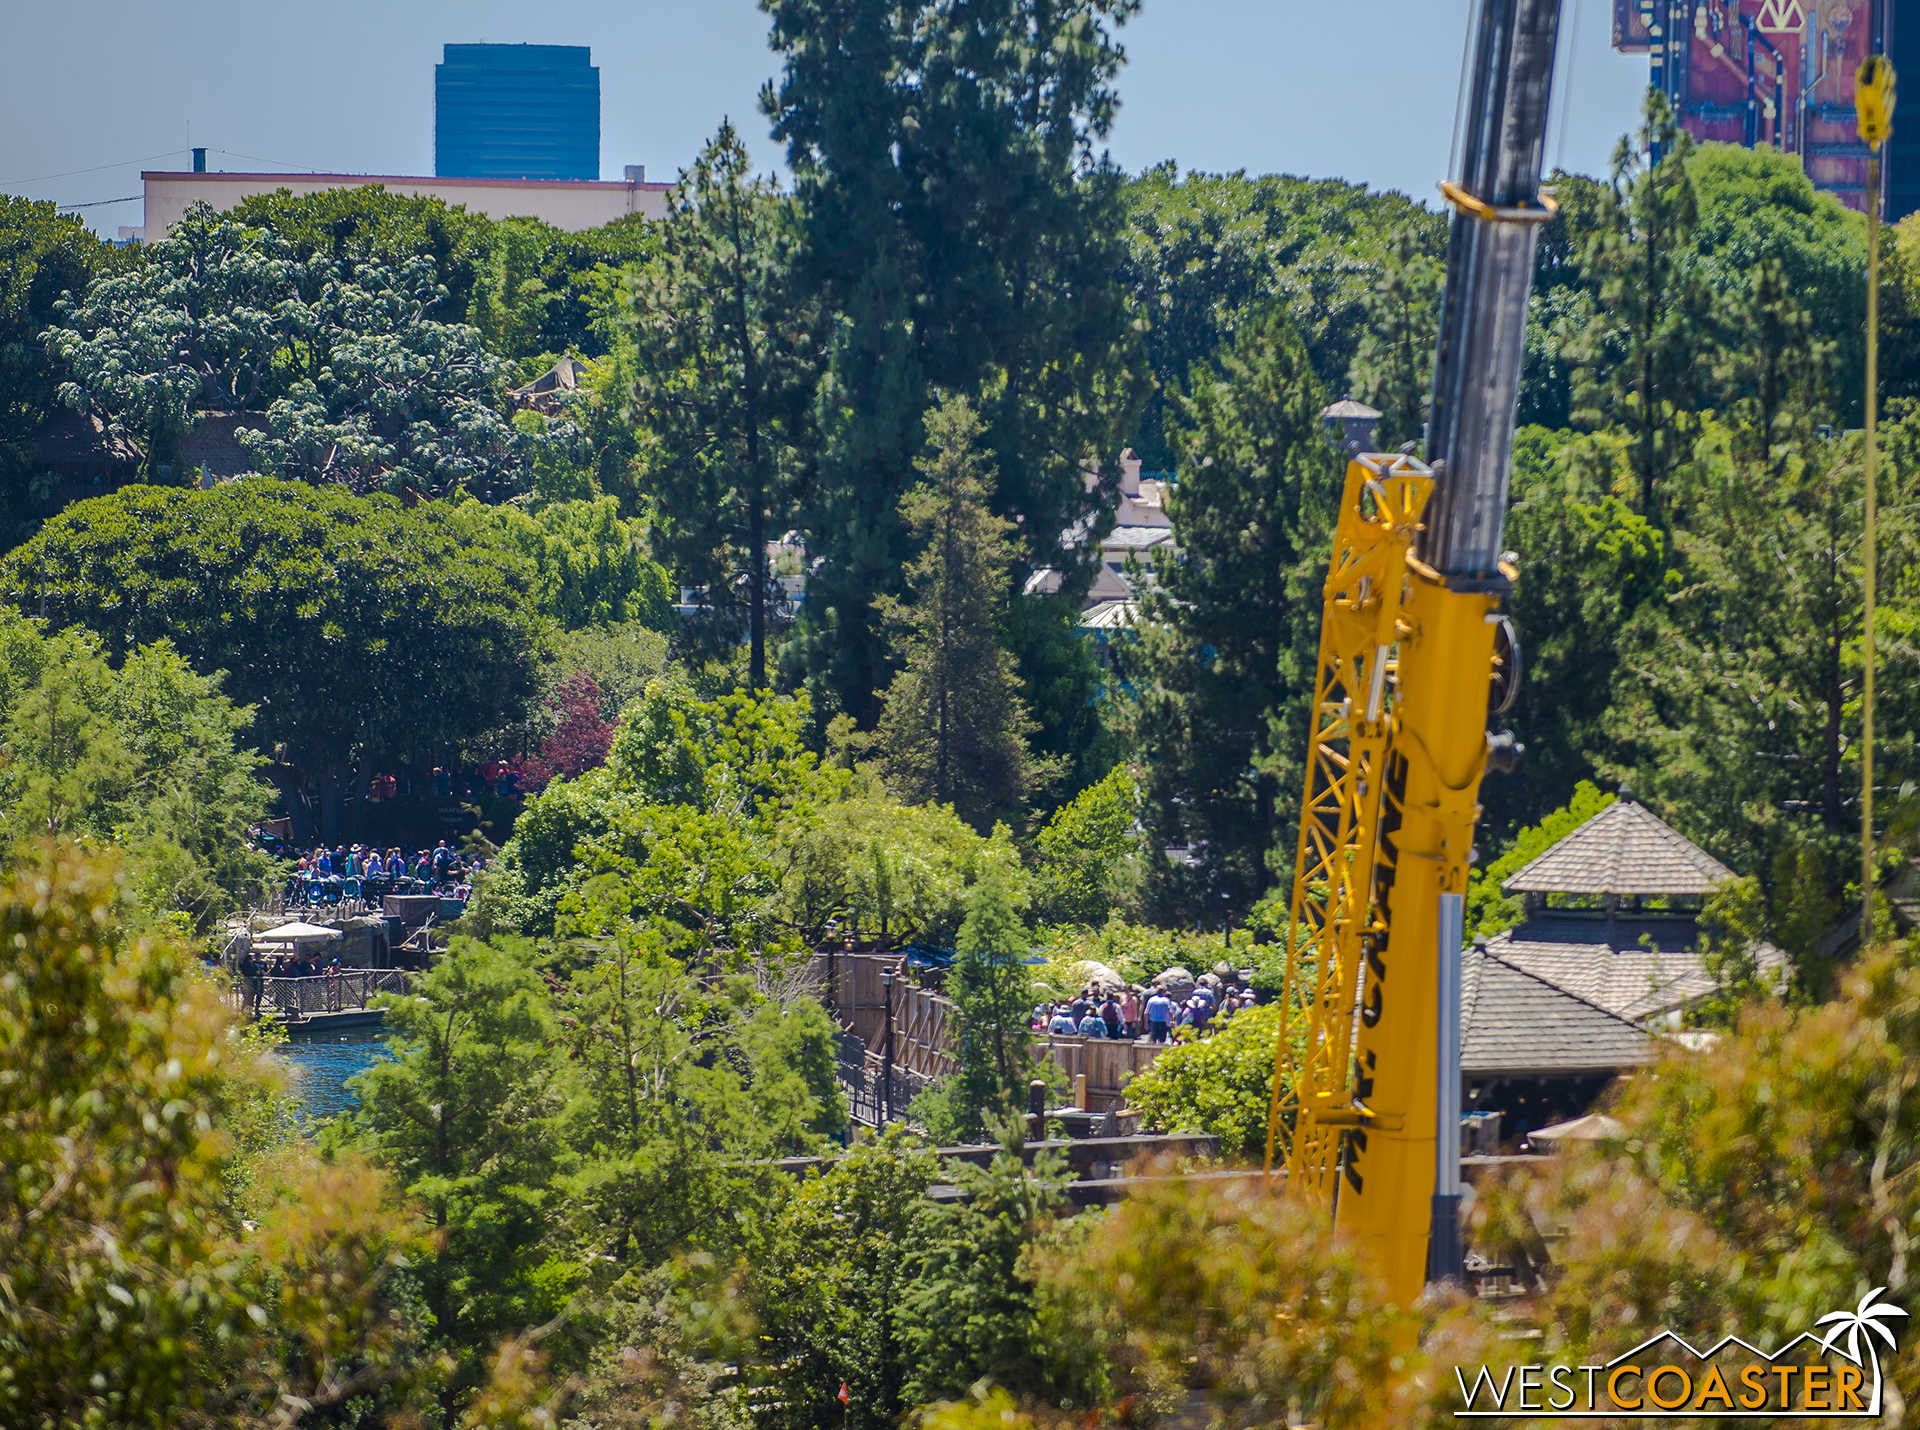  Looking further up yields a bit of a glimpse of the currently-blocked-off pathway along the Rivers of America leading to the entry.&nbsp; More on that a couple sections from now. 